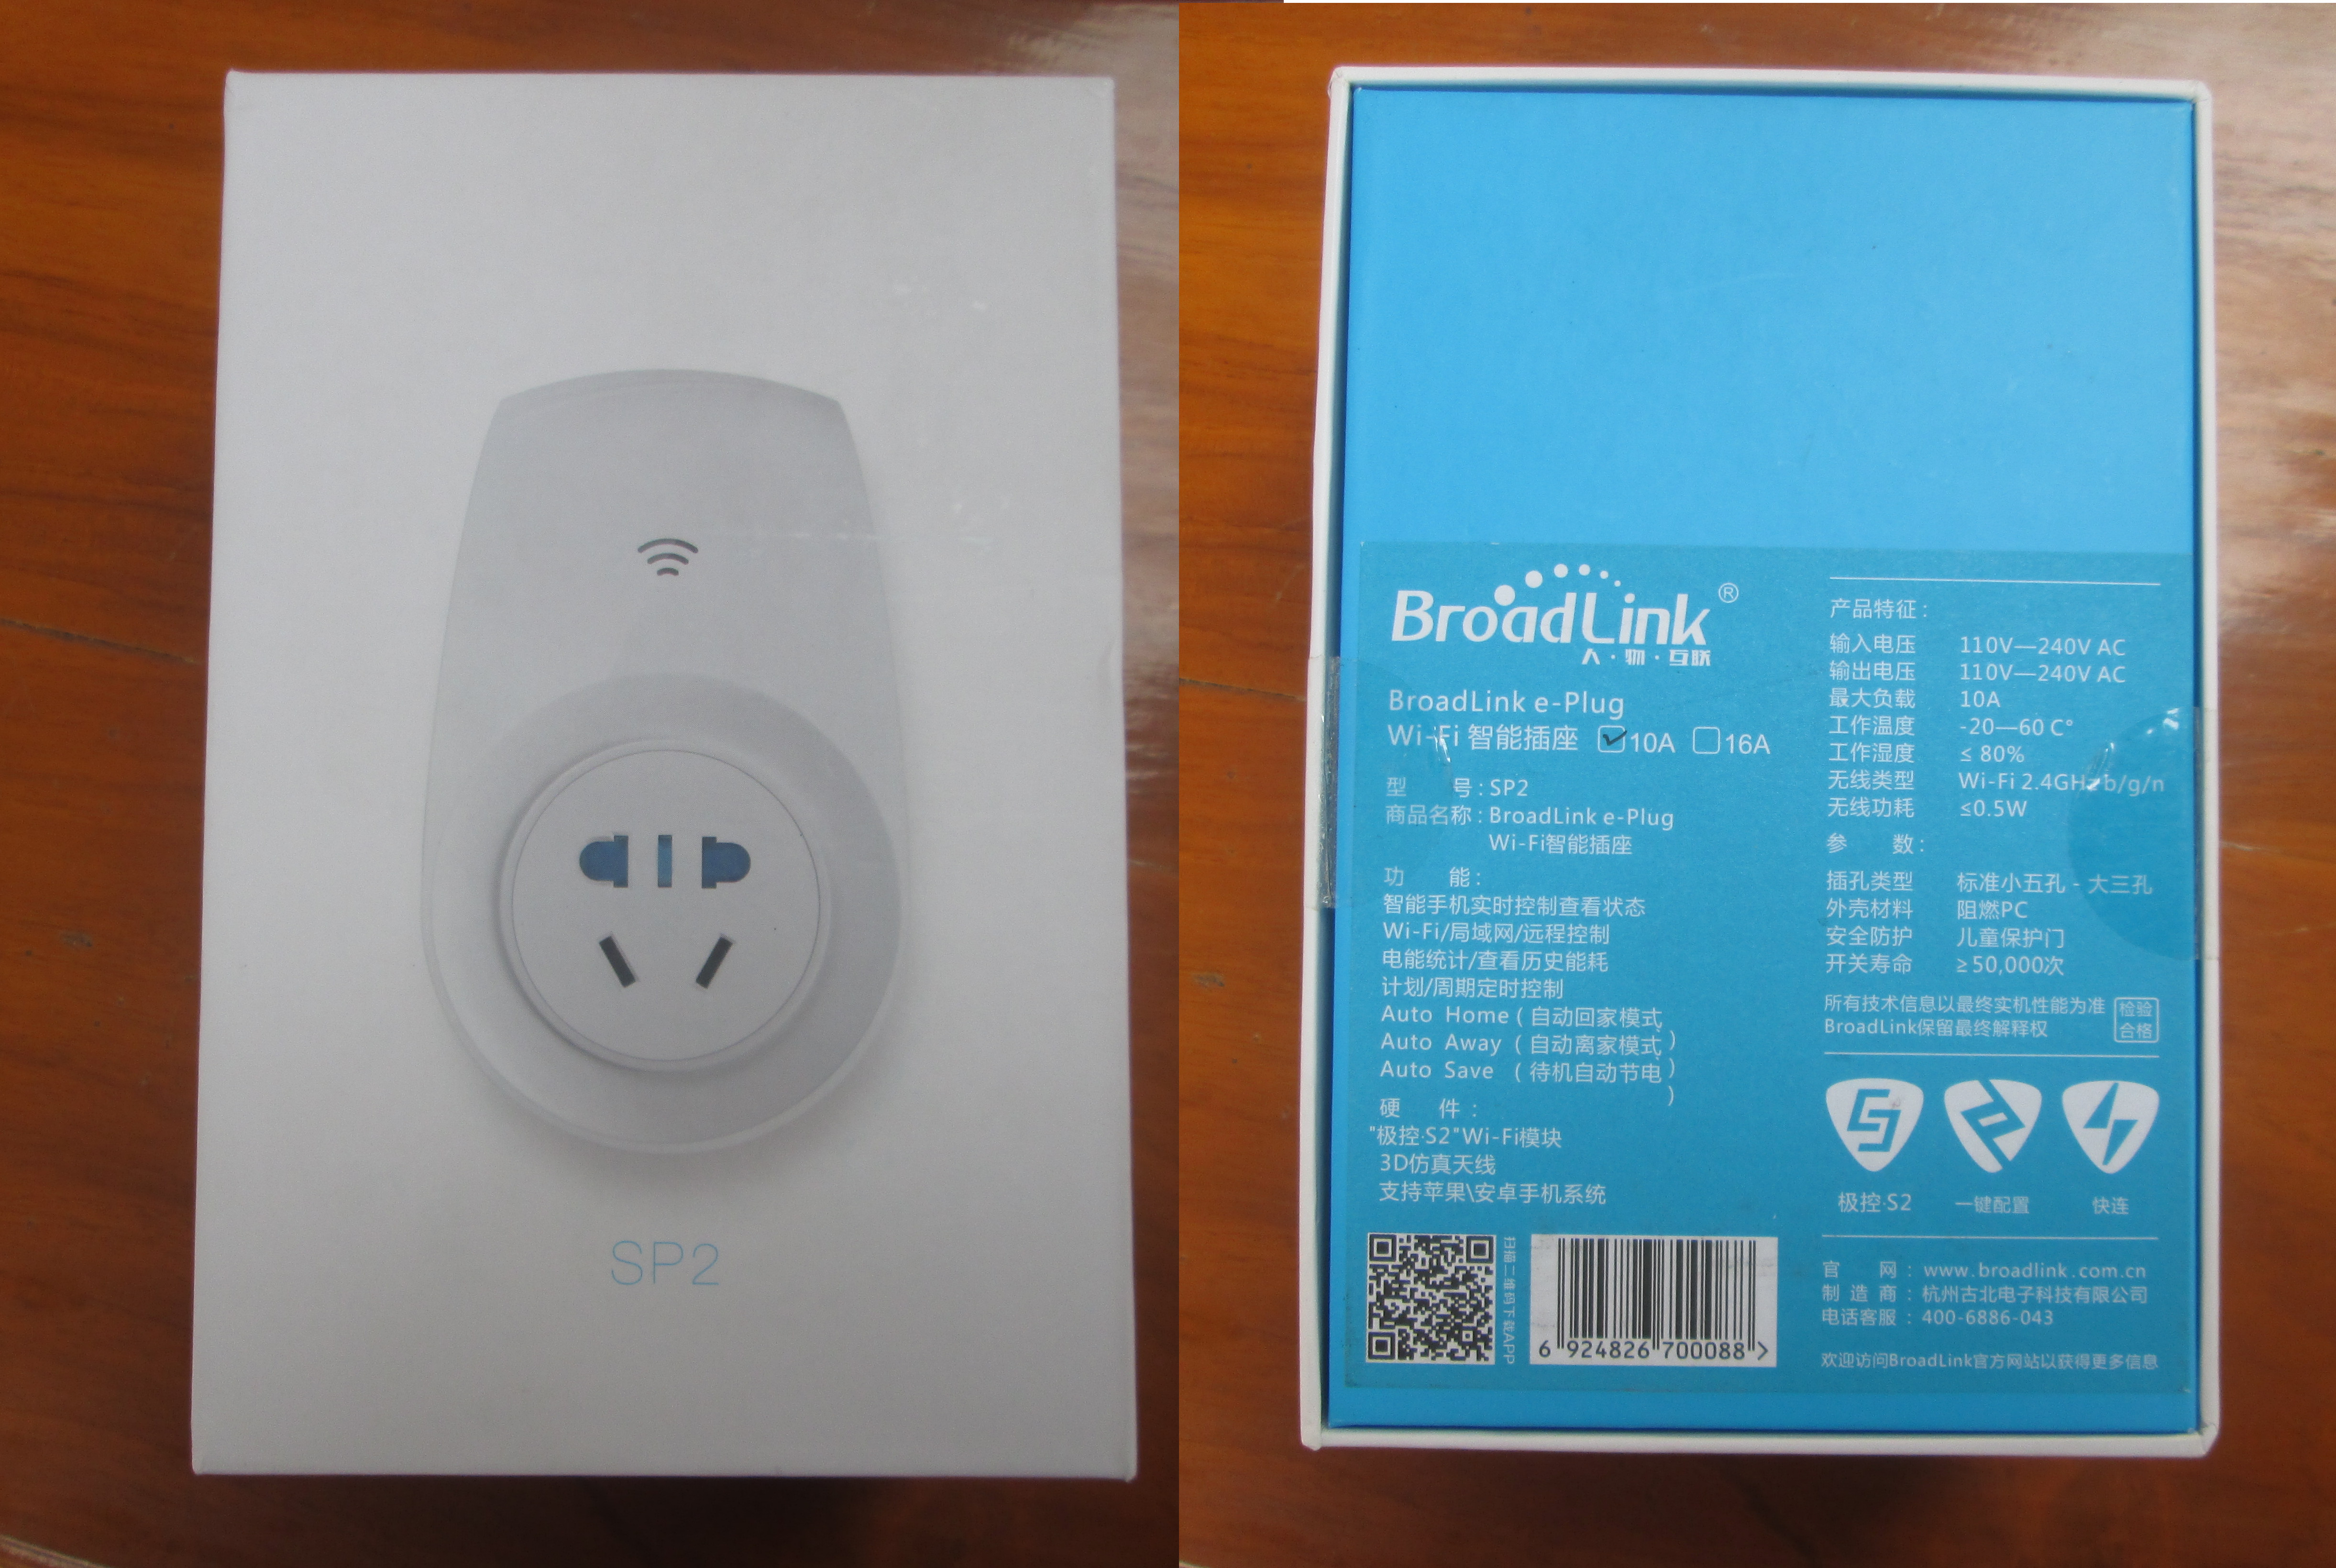 Review of Broadlink SP2 Wi-Fi Smart Plug - CNX Software